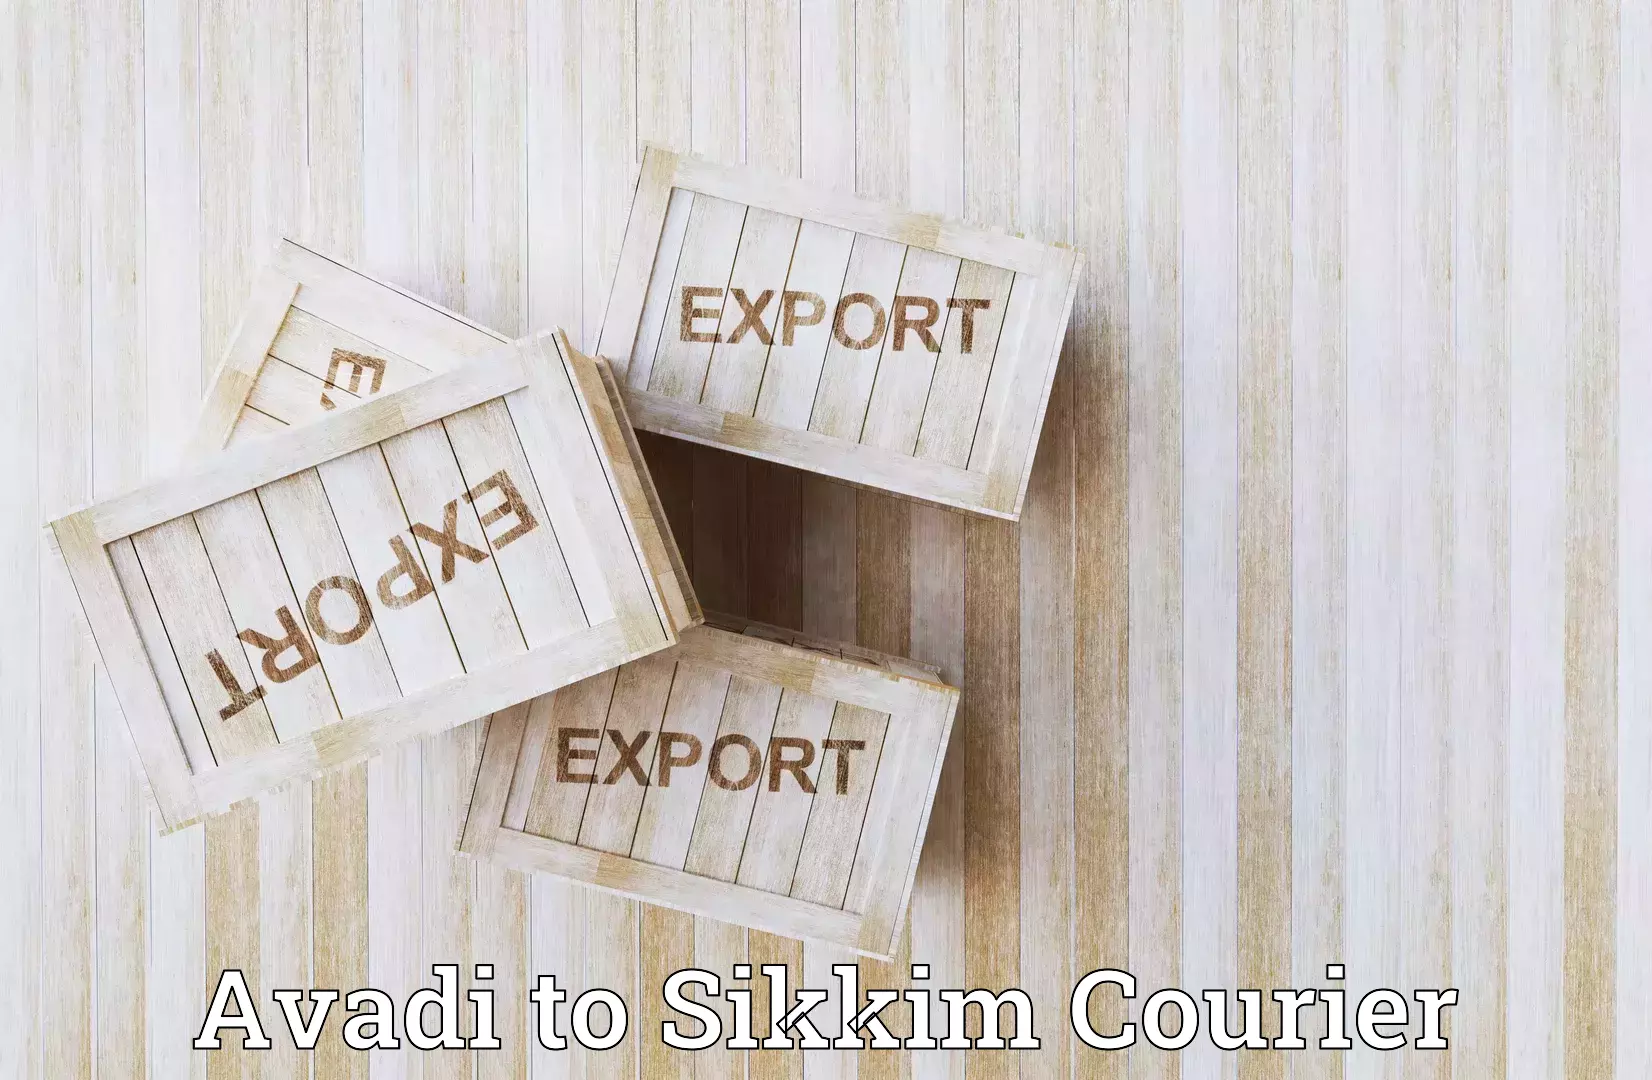 Express package transport Avadi to North Sikkim